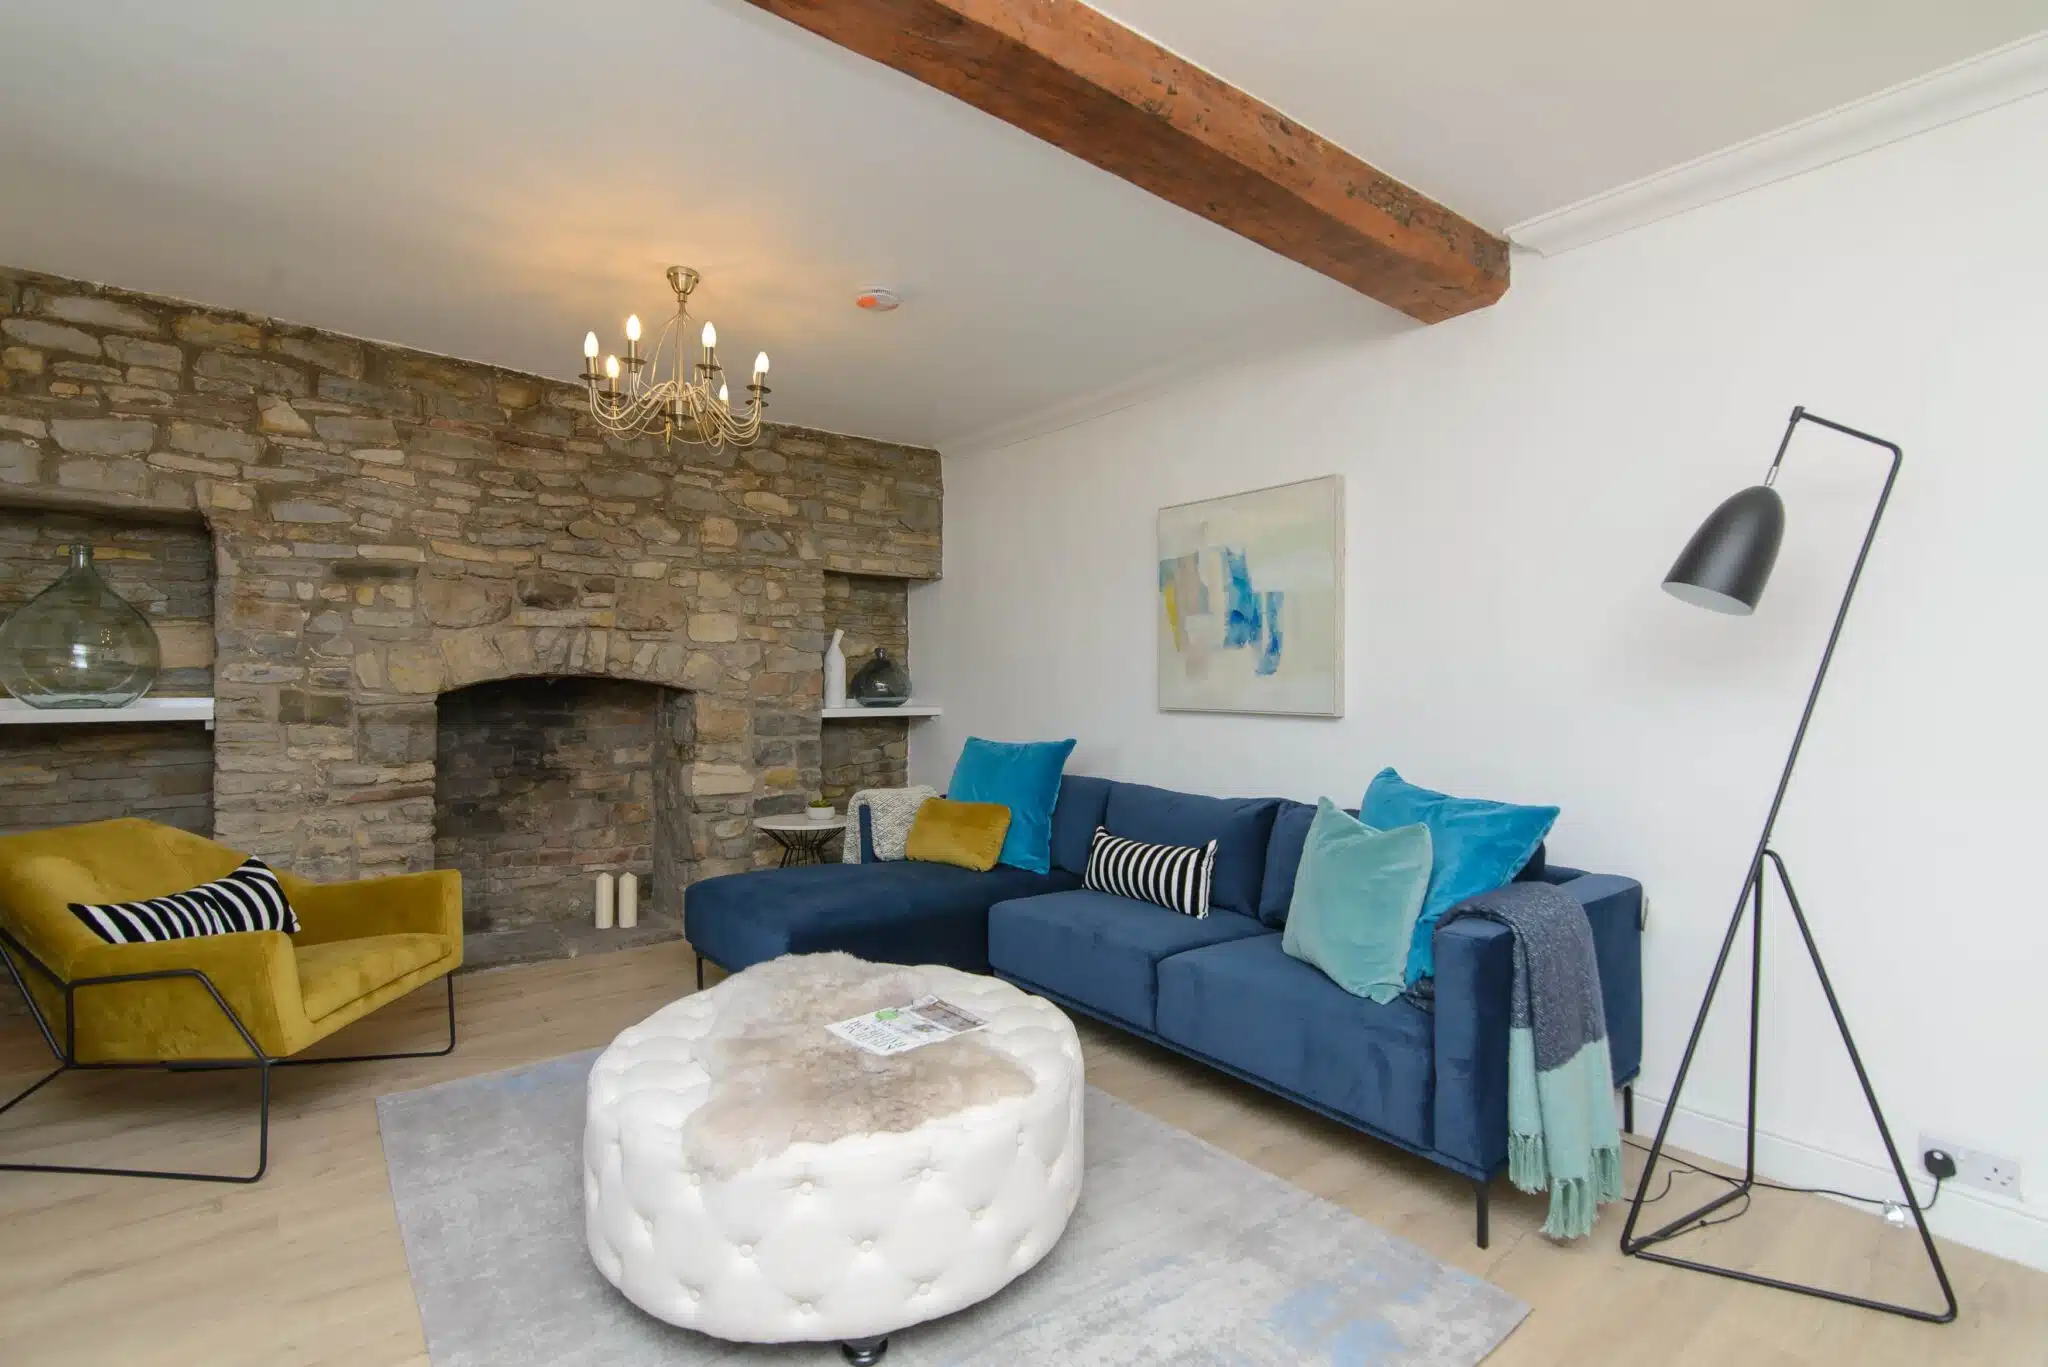 A stone wall living room cottage with blue designer sofa and yellow 